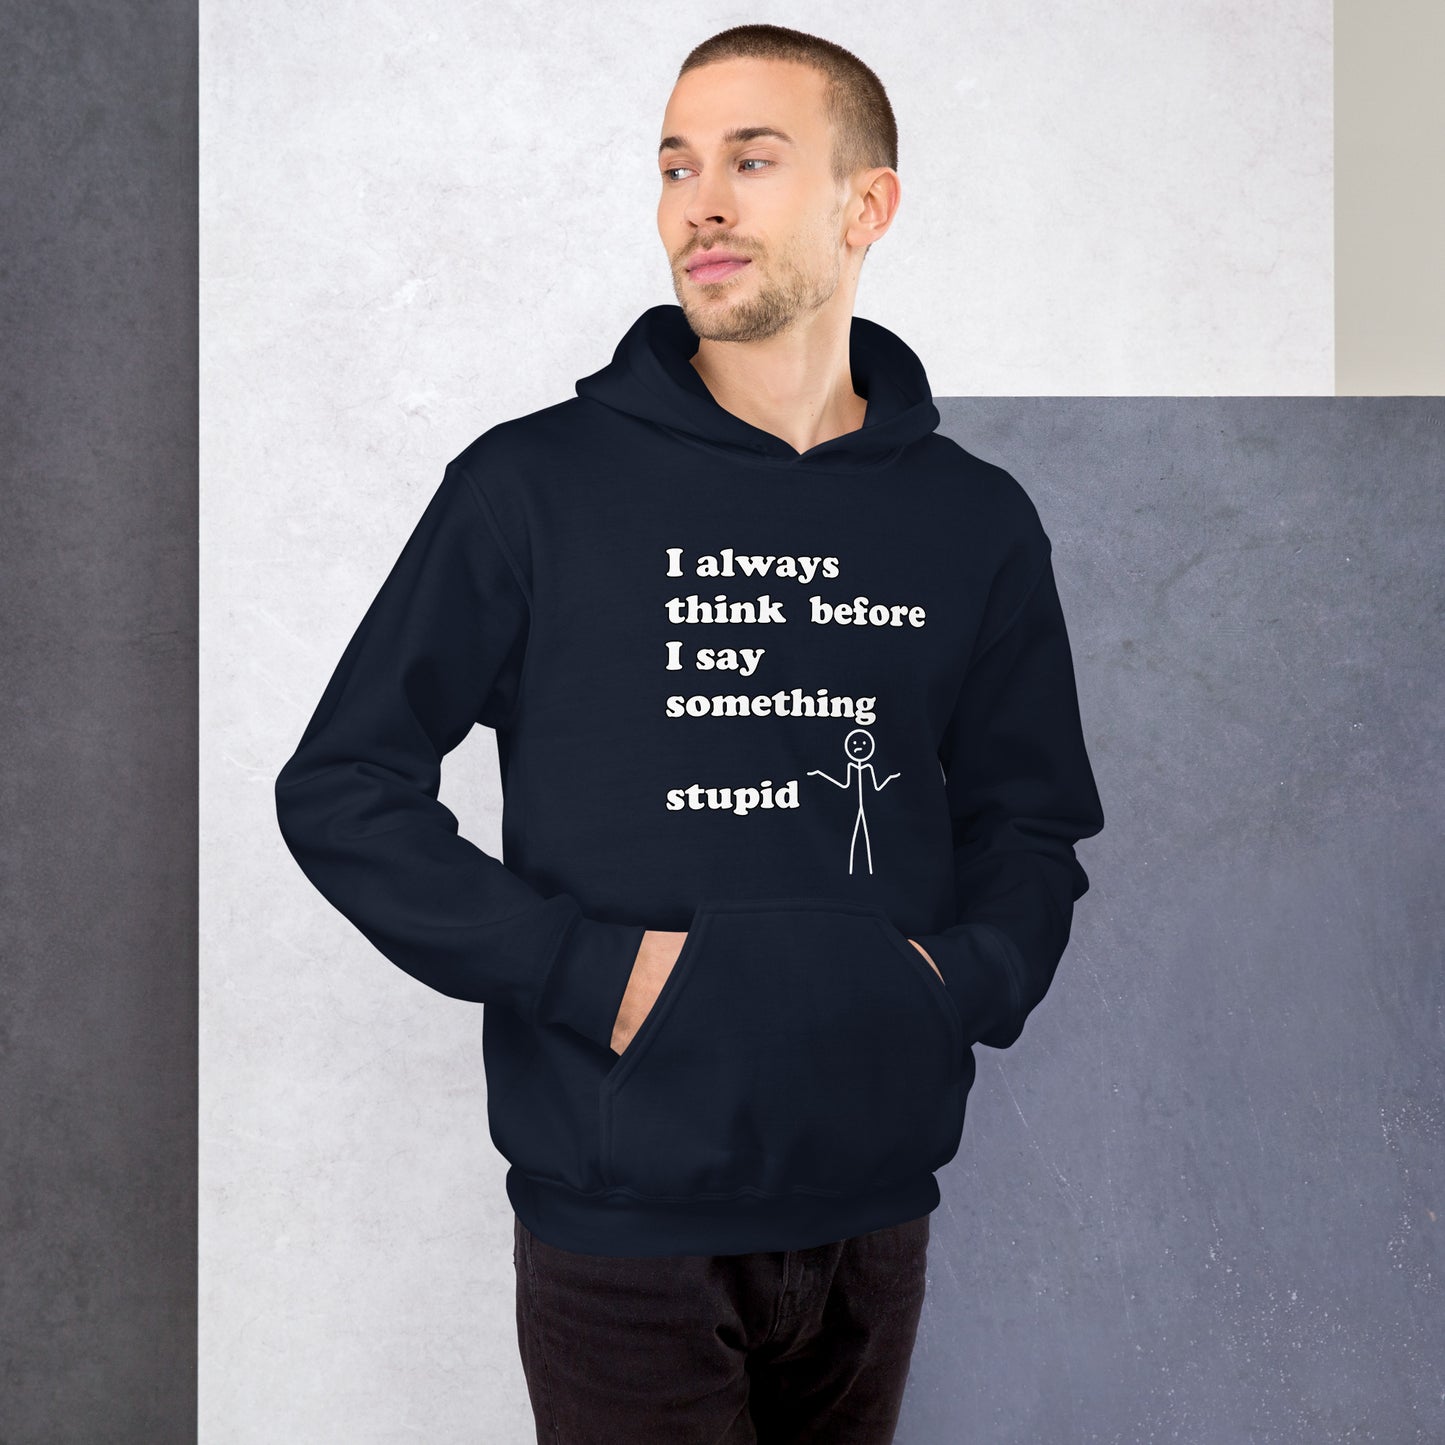 Man with navy blue hoodie with text "I always think before I say something stupid"